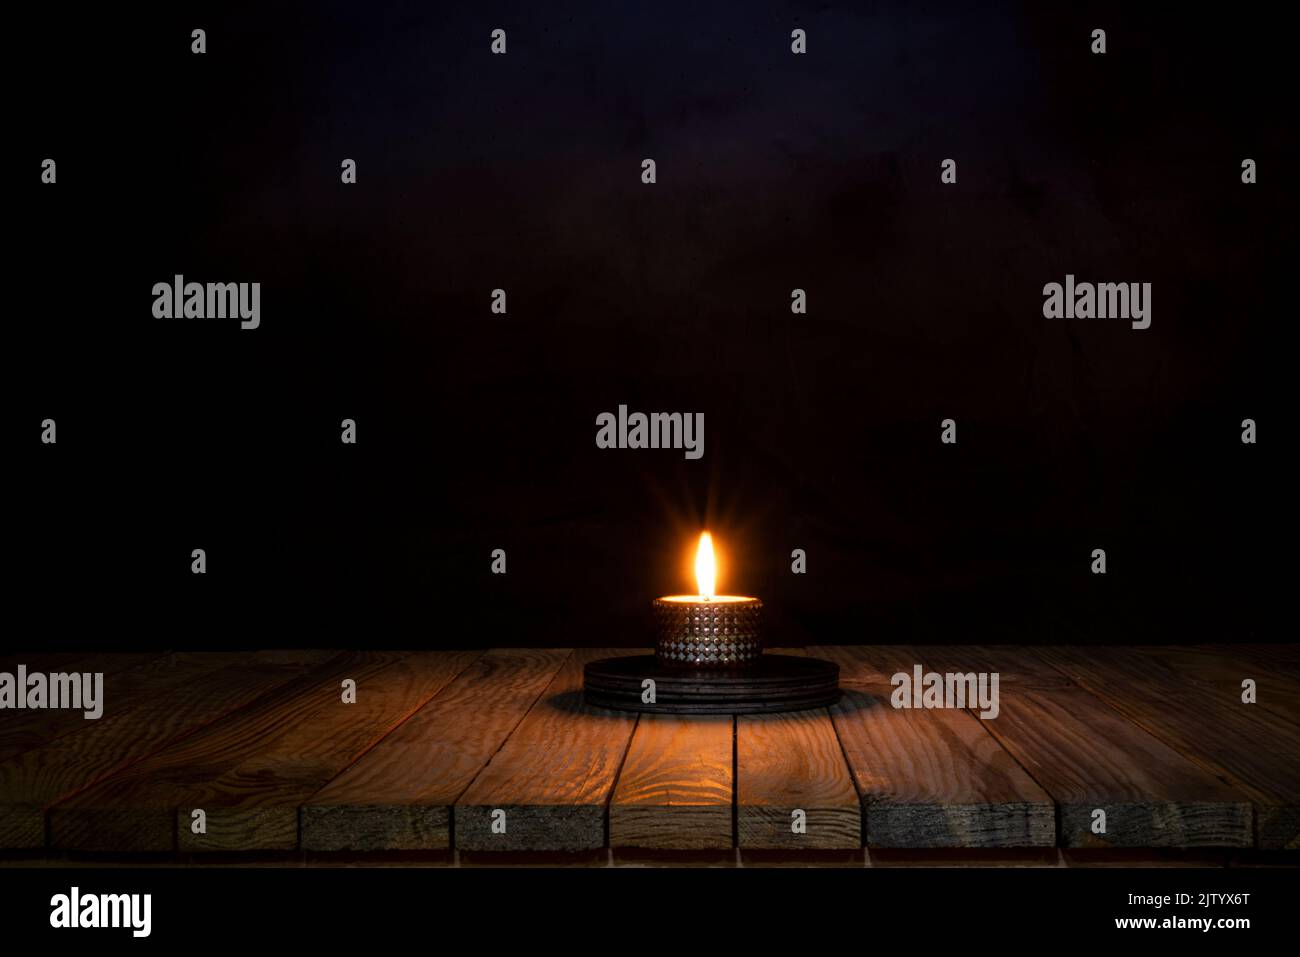 Candle light spreading on wooden table surface. Stock Photo